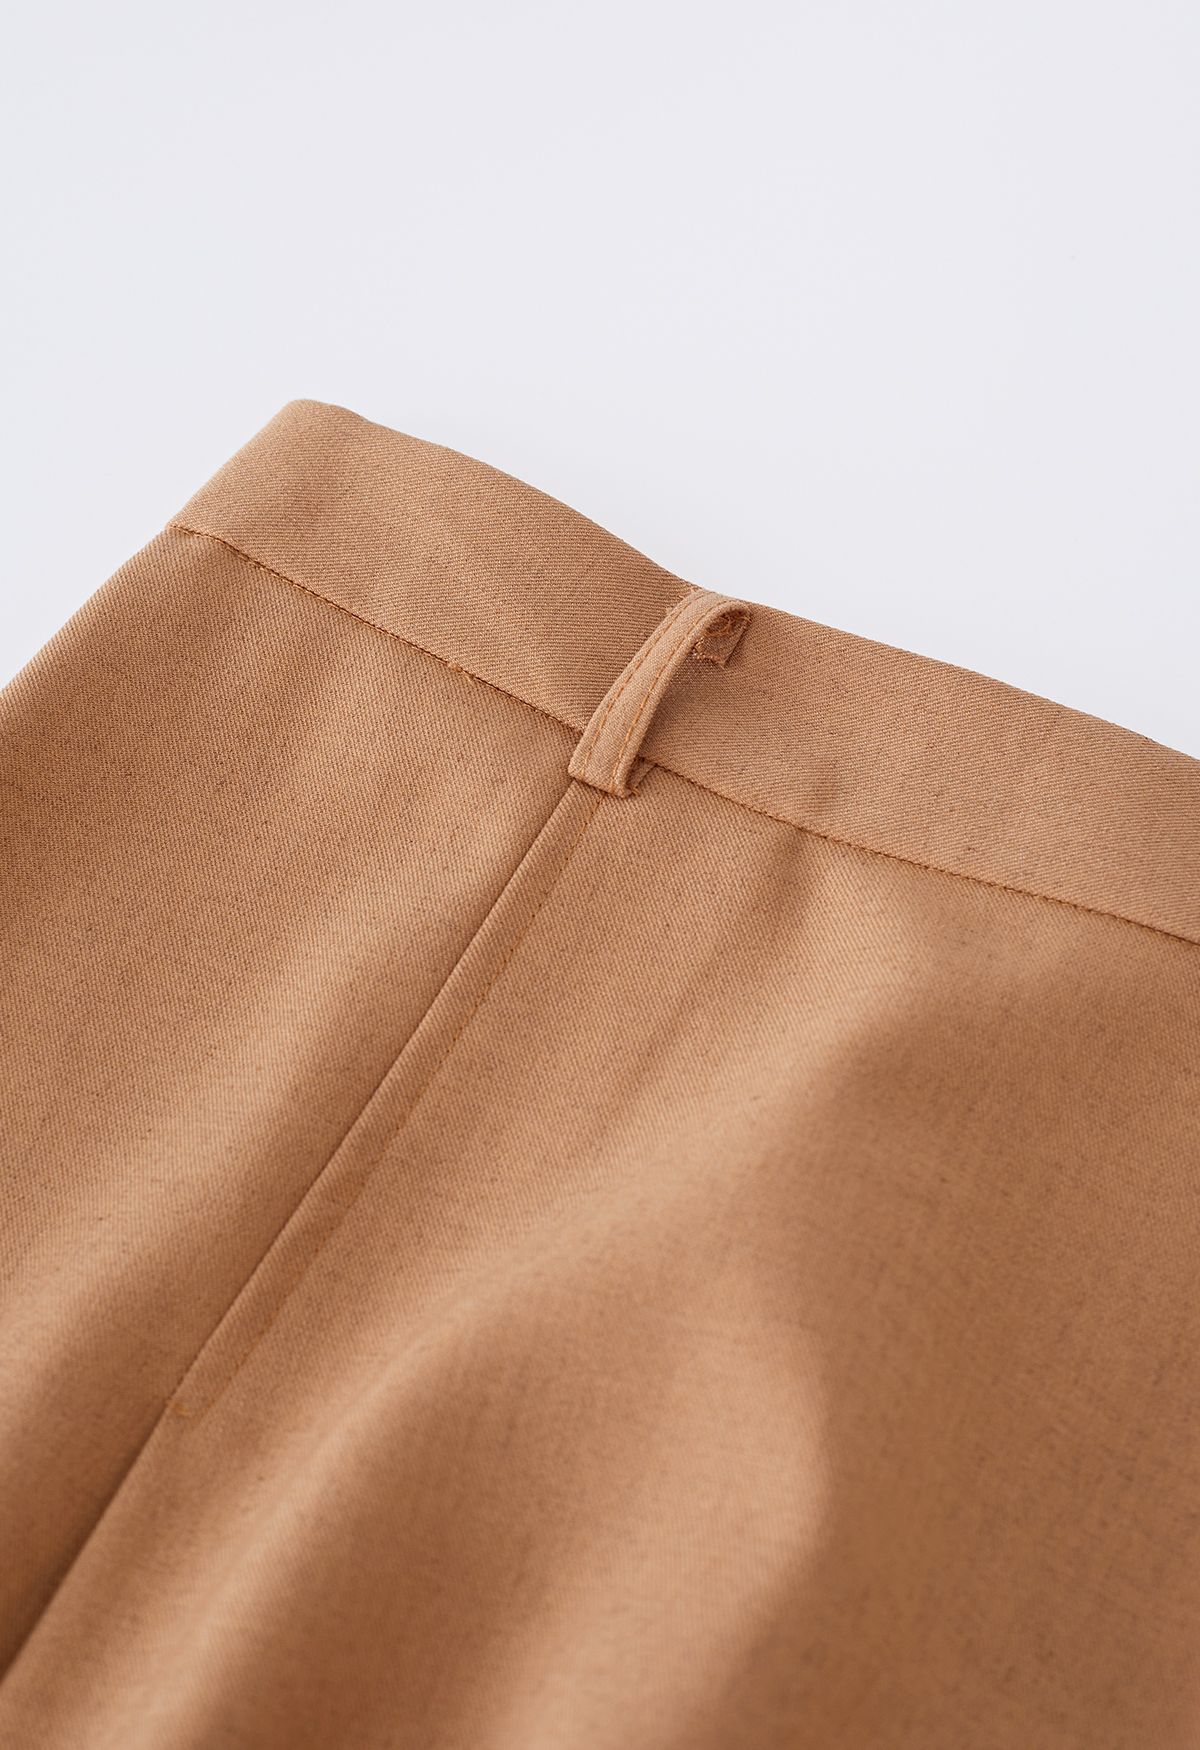 Elementary A-Line Maxi Skirt in Light Tan